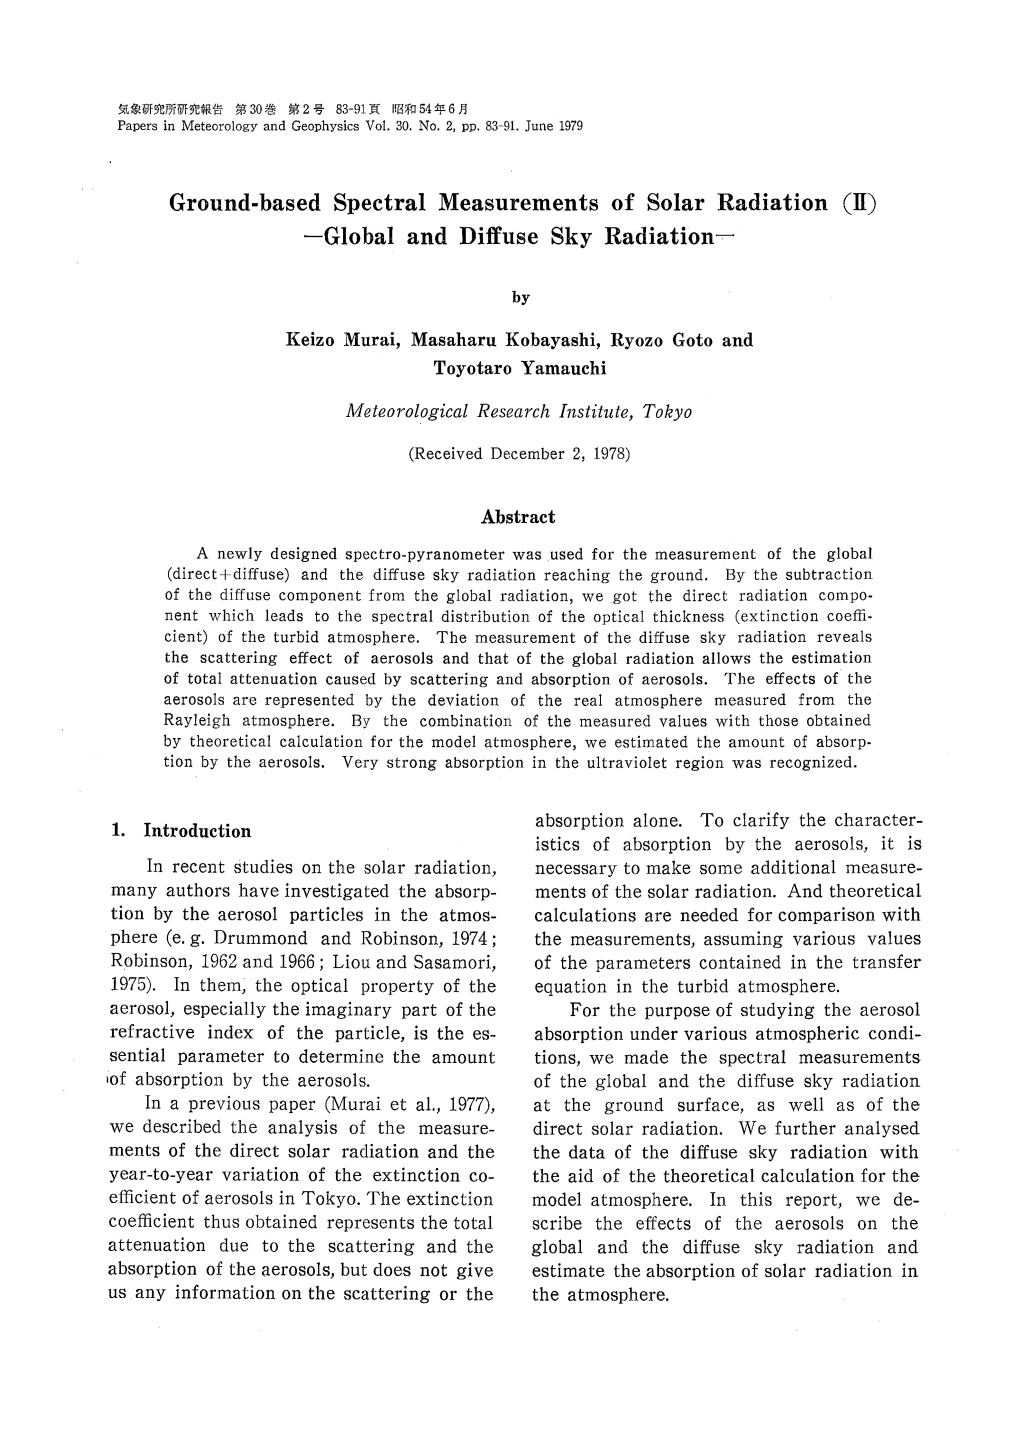 Ground-Based Spectral Measurements of Solar Radiation (II) - Global and Diffuse Sky Radiation